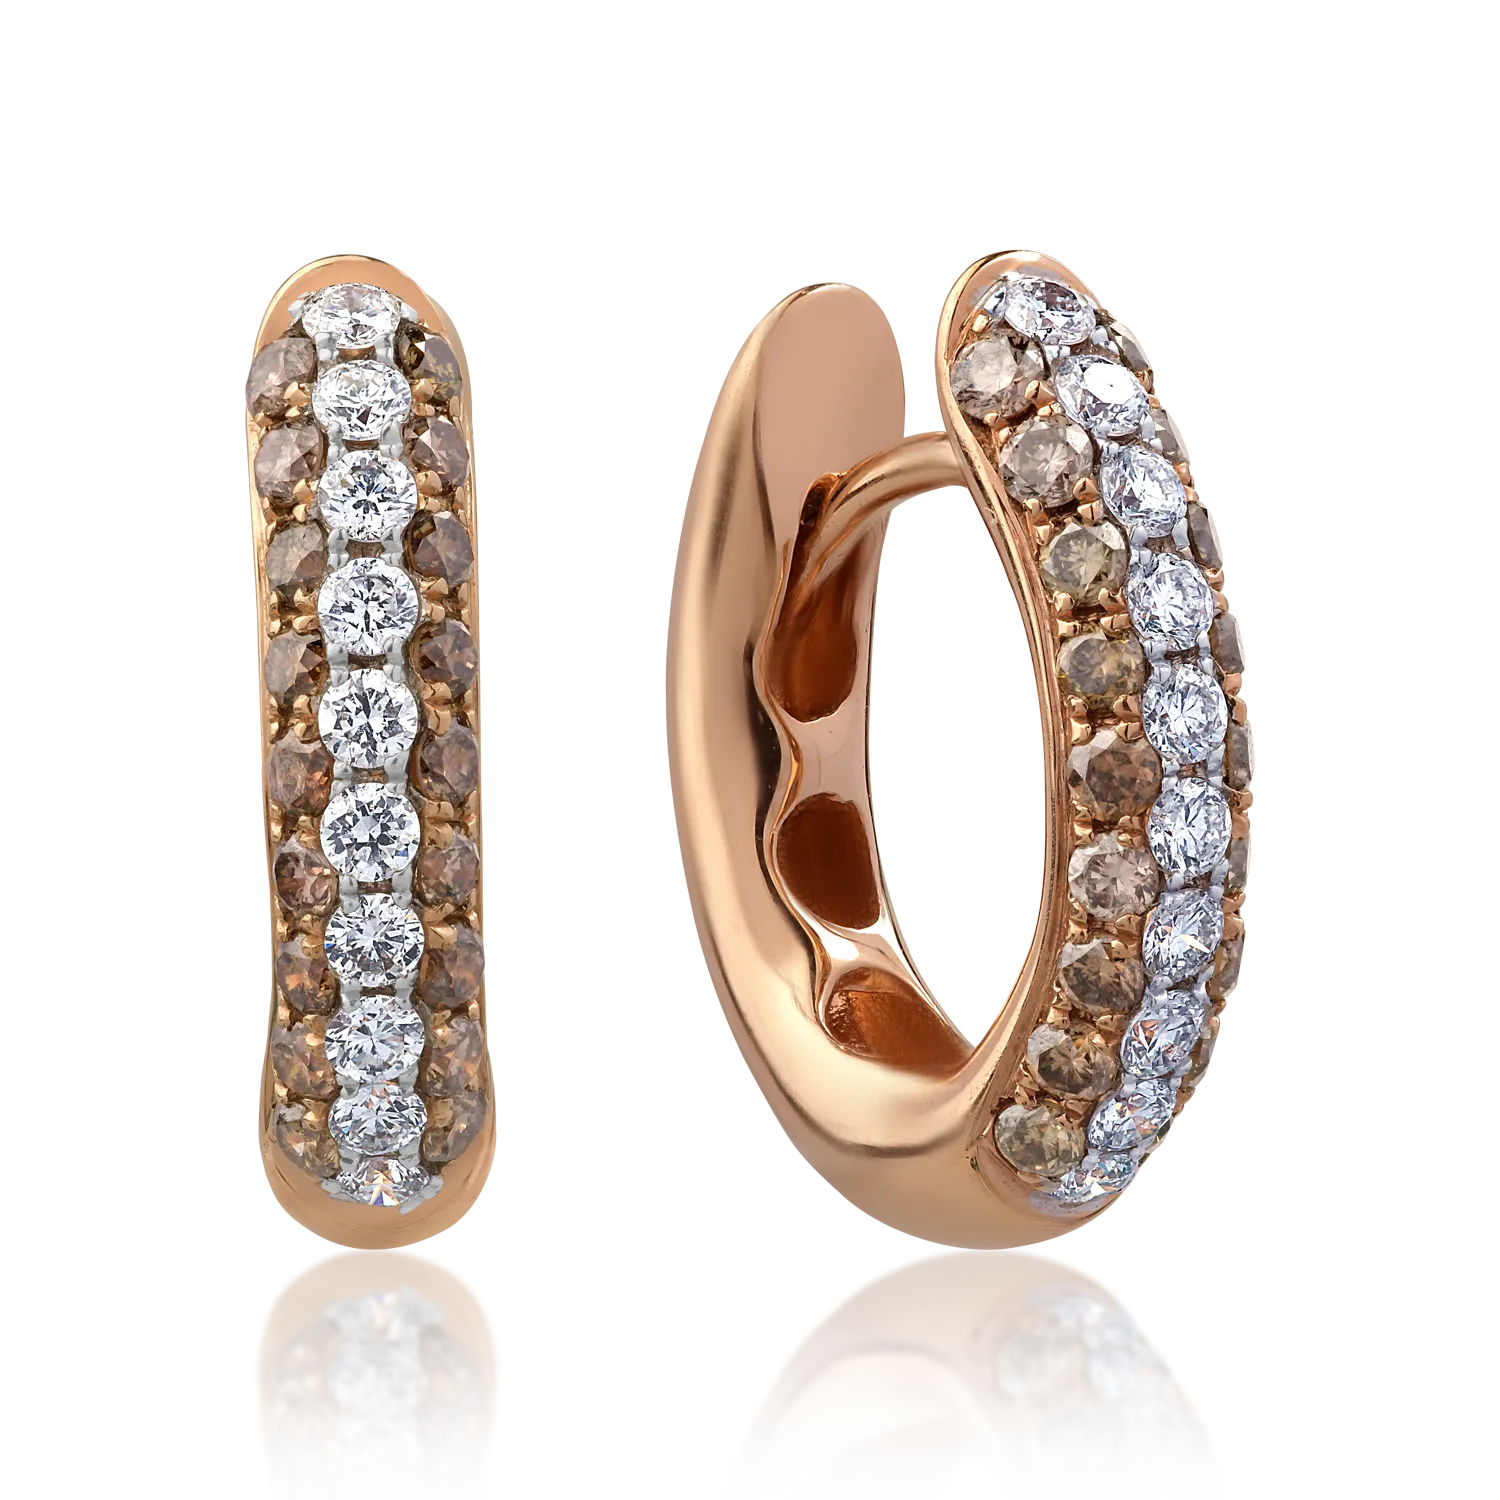 18K rose gold earrings with 0.24ct clear diamonds and 0.36ct brown diamonds